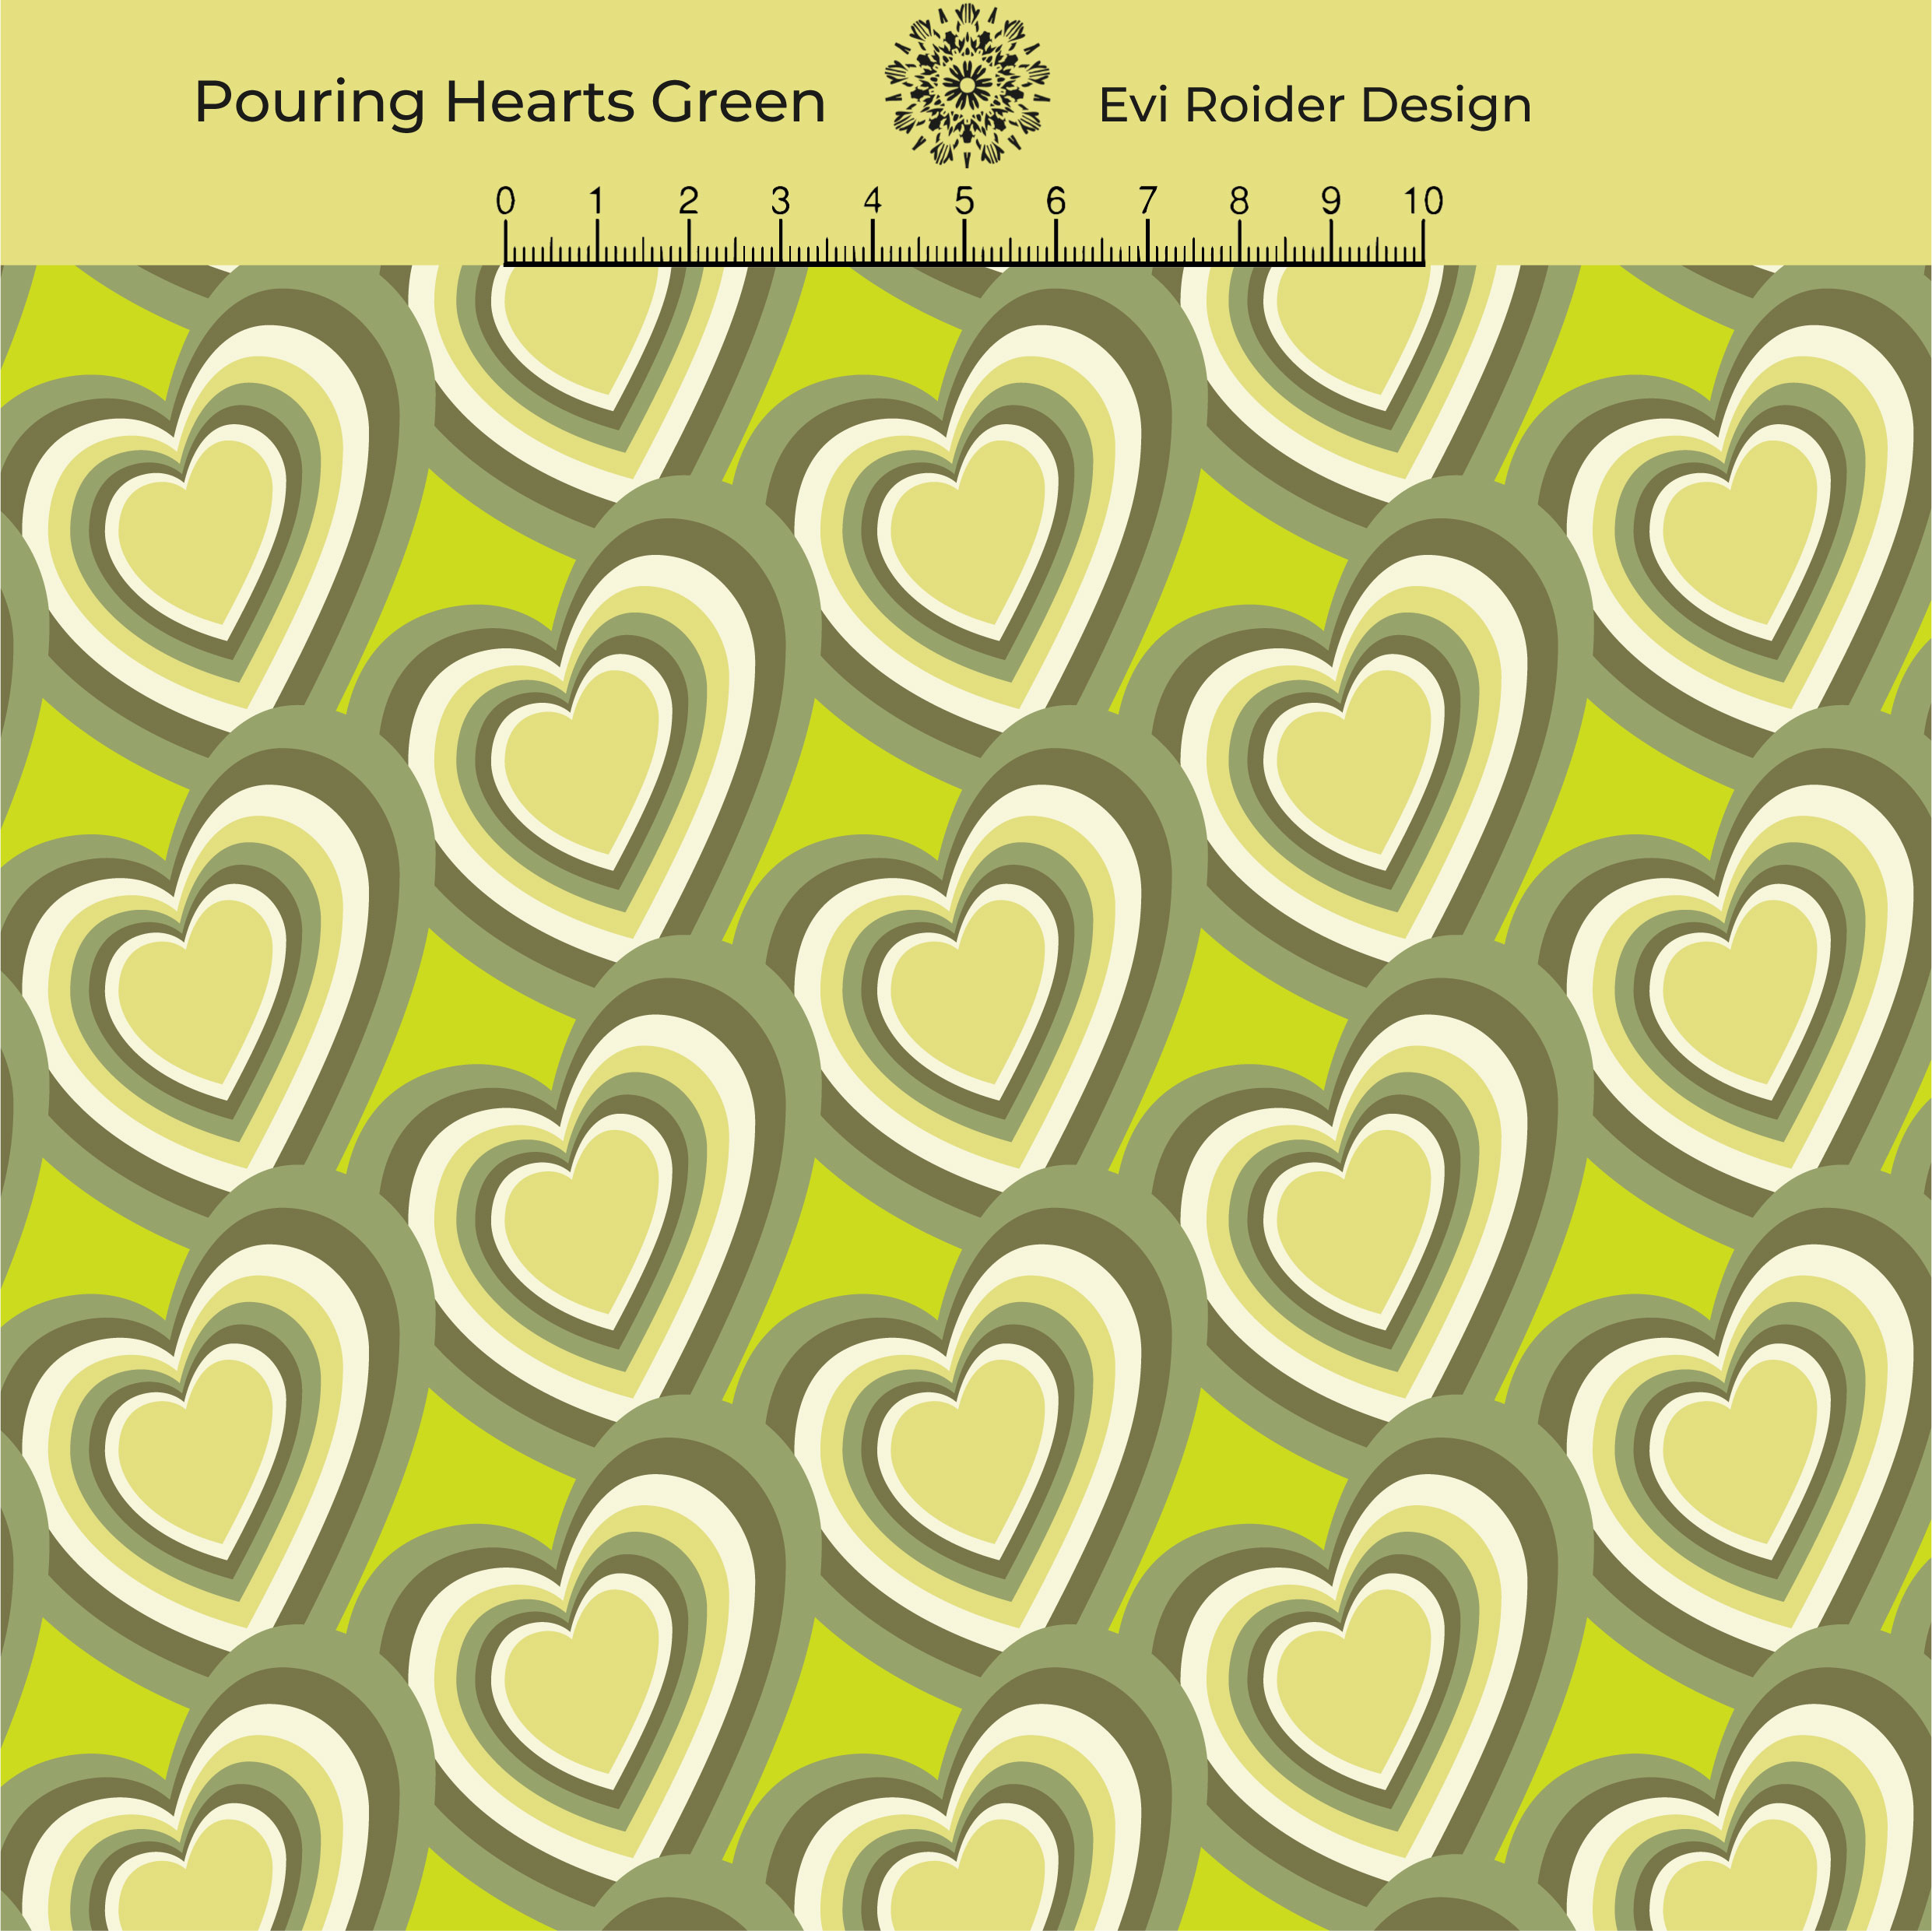 Pouring Hearts Green